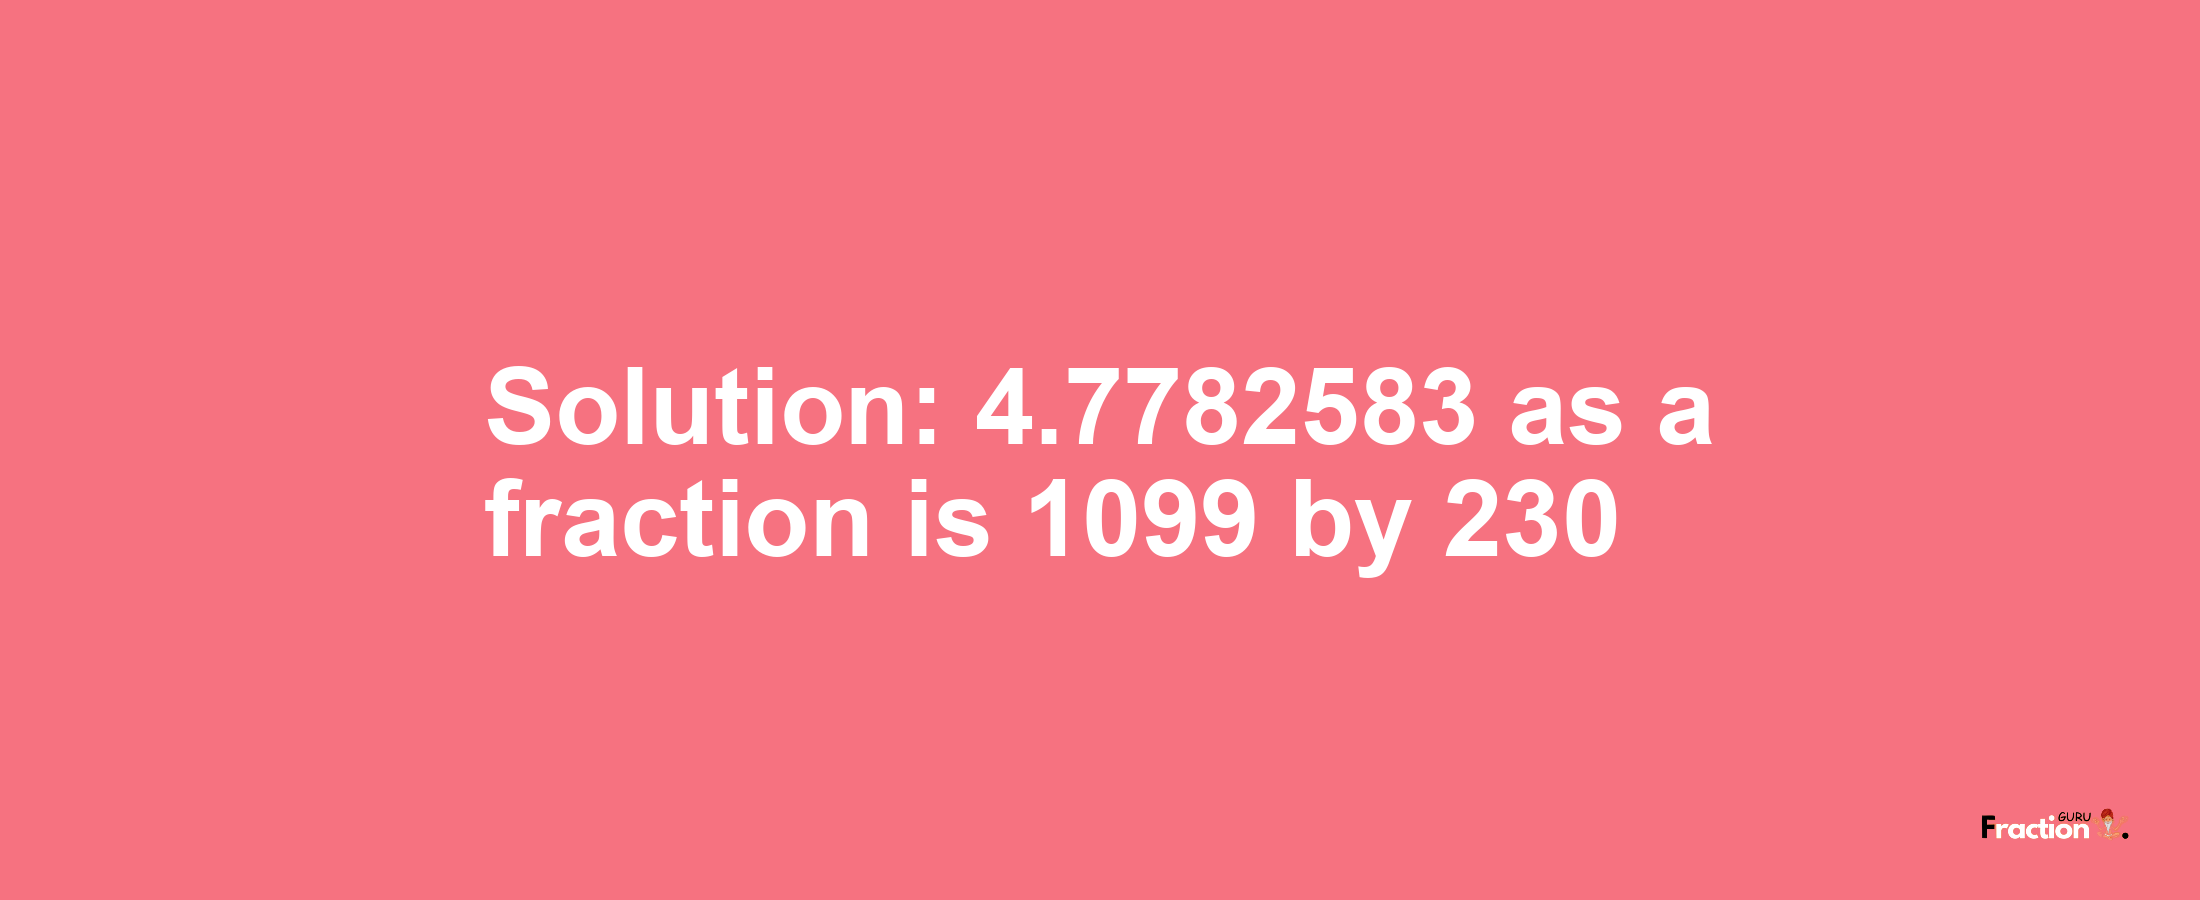 Solution:4.7782583 as a fraction is 1099/230